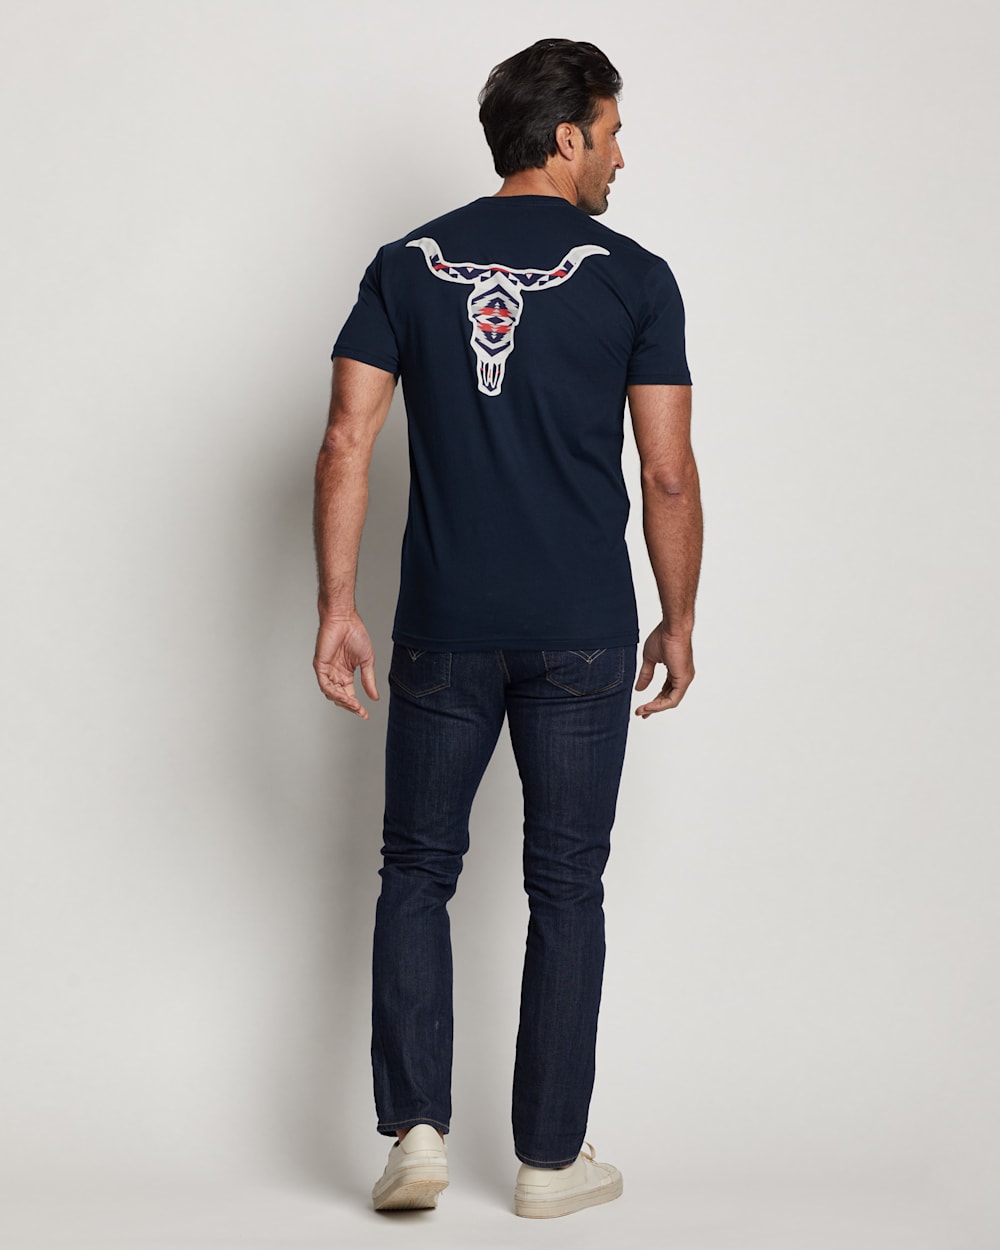 ALTERNATE VIEW OF MEN'S TECOPA HILLS LONGHORN GRAPHIC TEE IN MIDNIGHT NAVY/WHITE image number 3